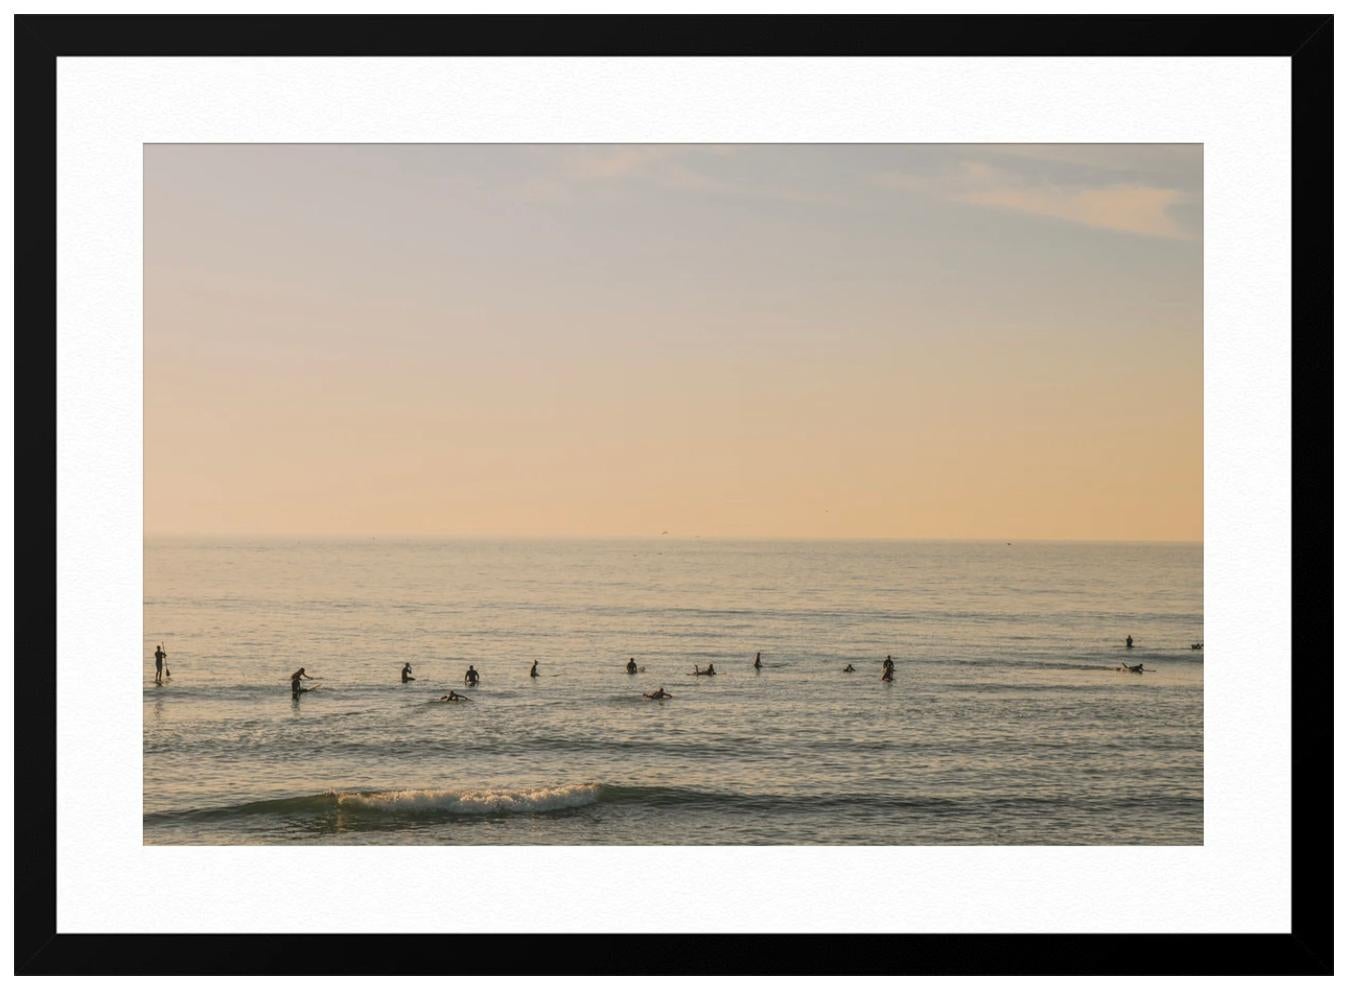 THIS PIECE IS AVAILABLE FRAMED.  Please reach out to the gallery for additional information.

ABOUT THIS PIECE: French photographer Ludwig Favre recently road tripped to California. His pictures of California's iconic architecture and beaches carry